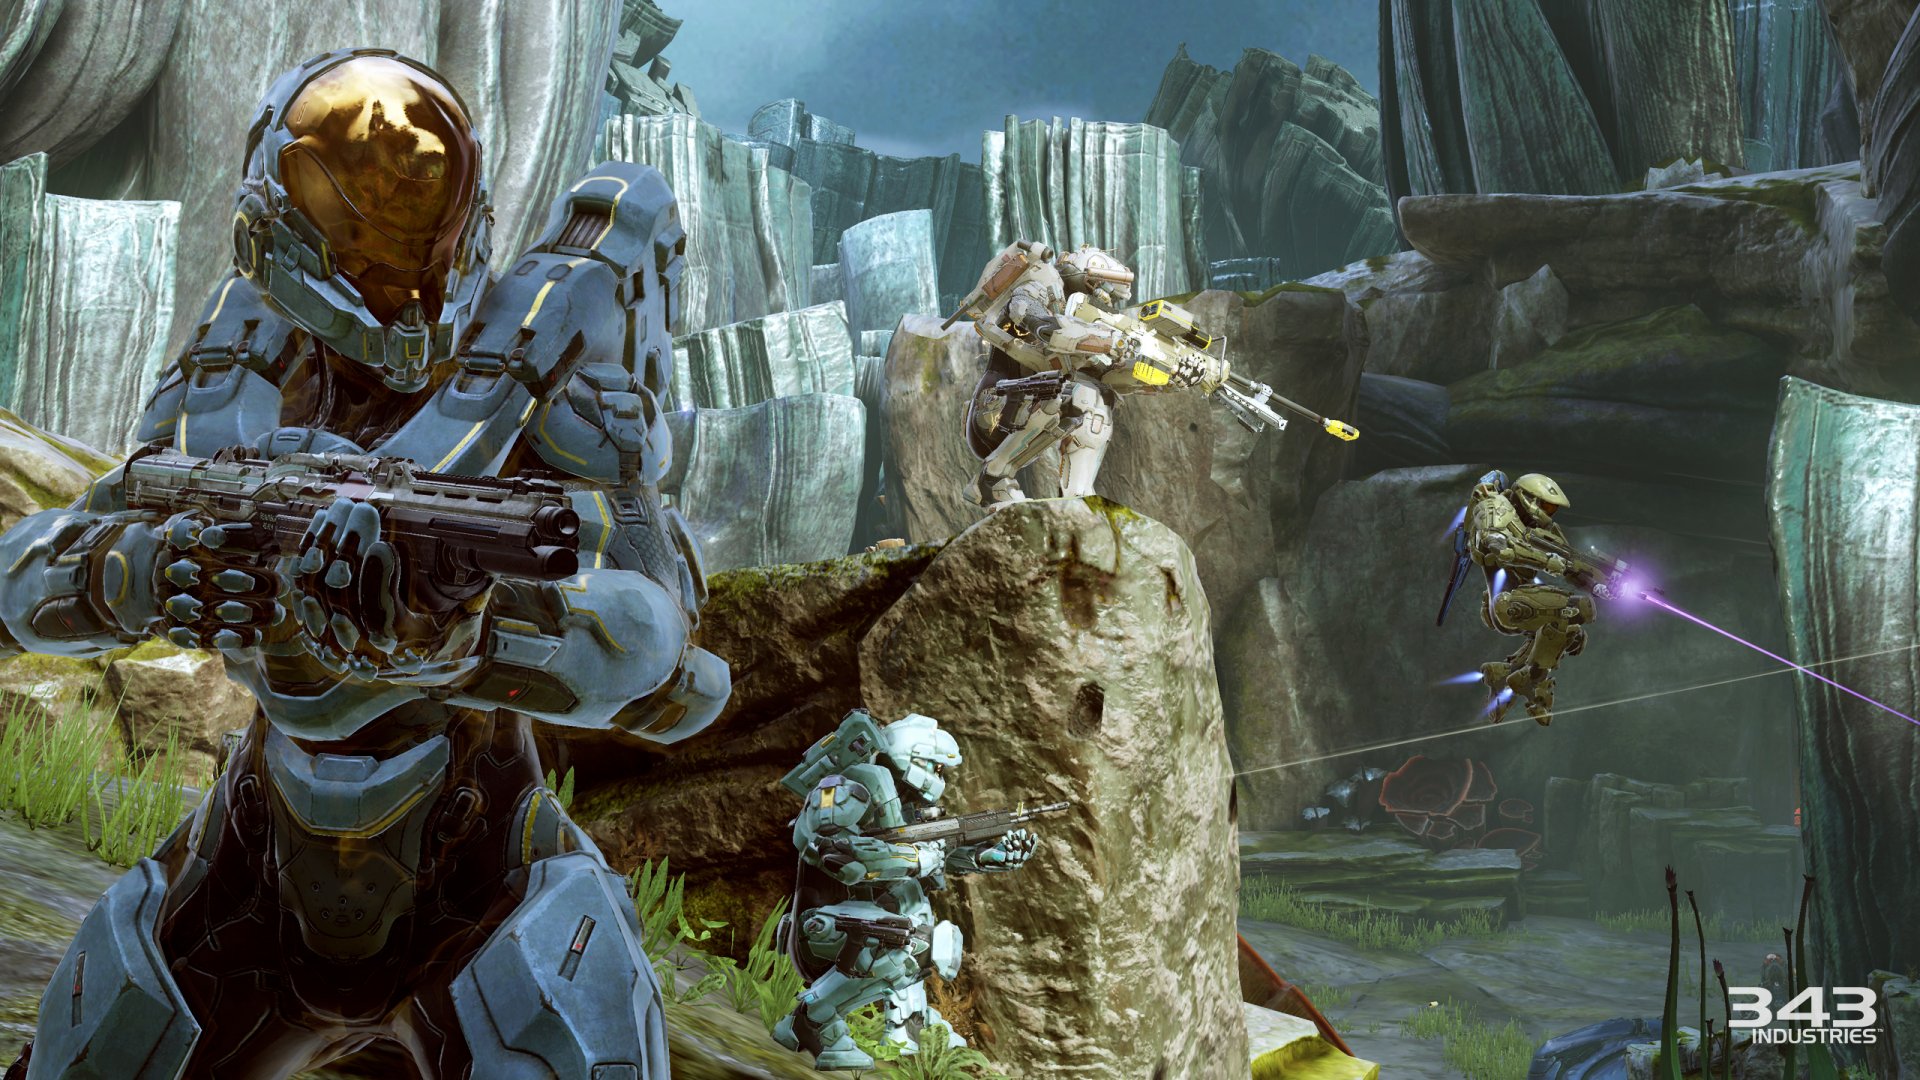 Does Halo 5 have co-op mode?